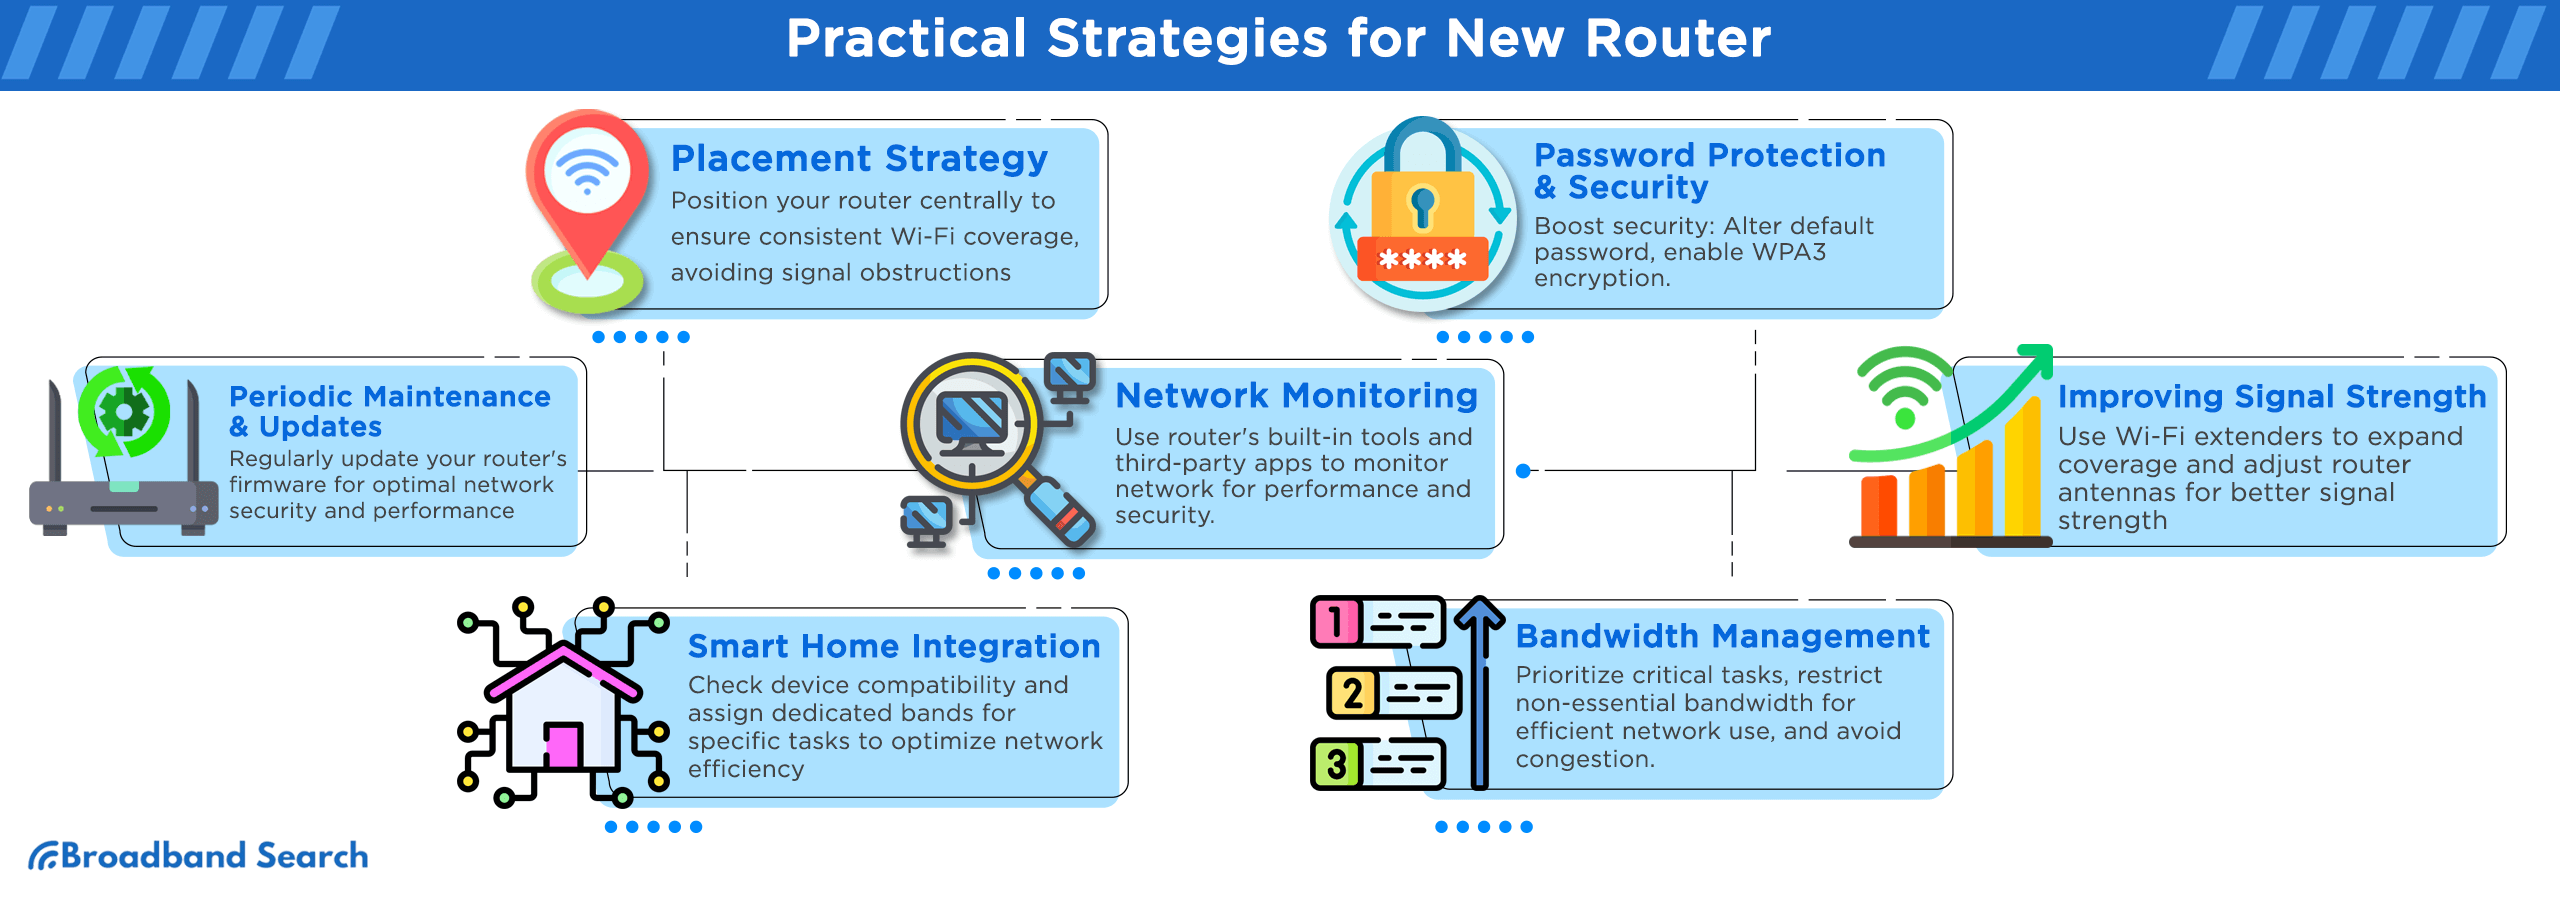 Practical strategies for new router